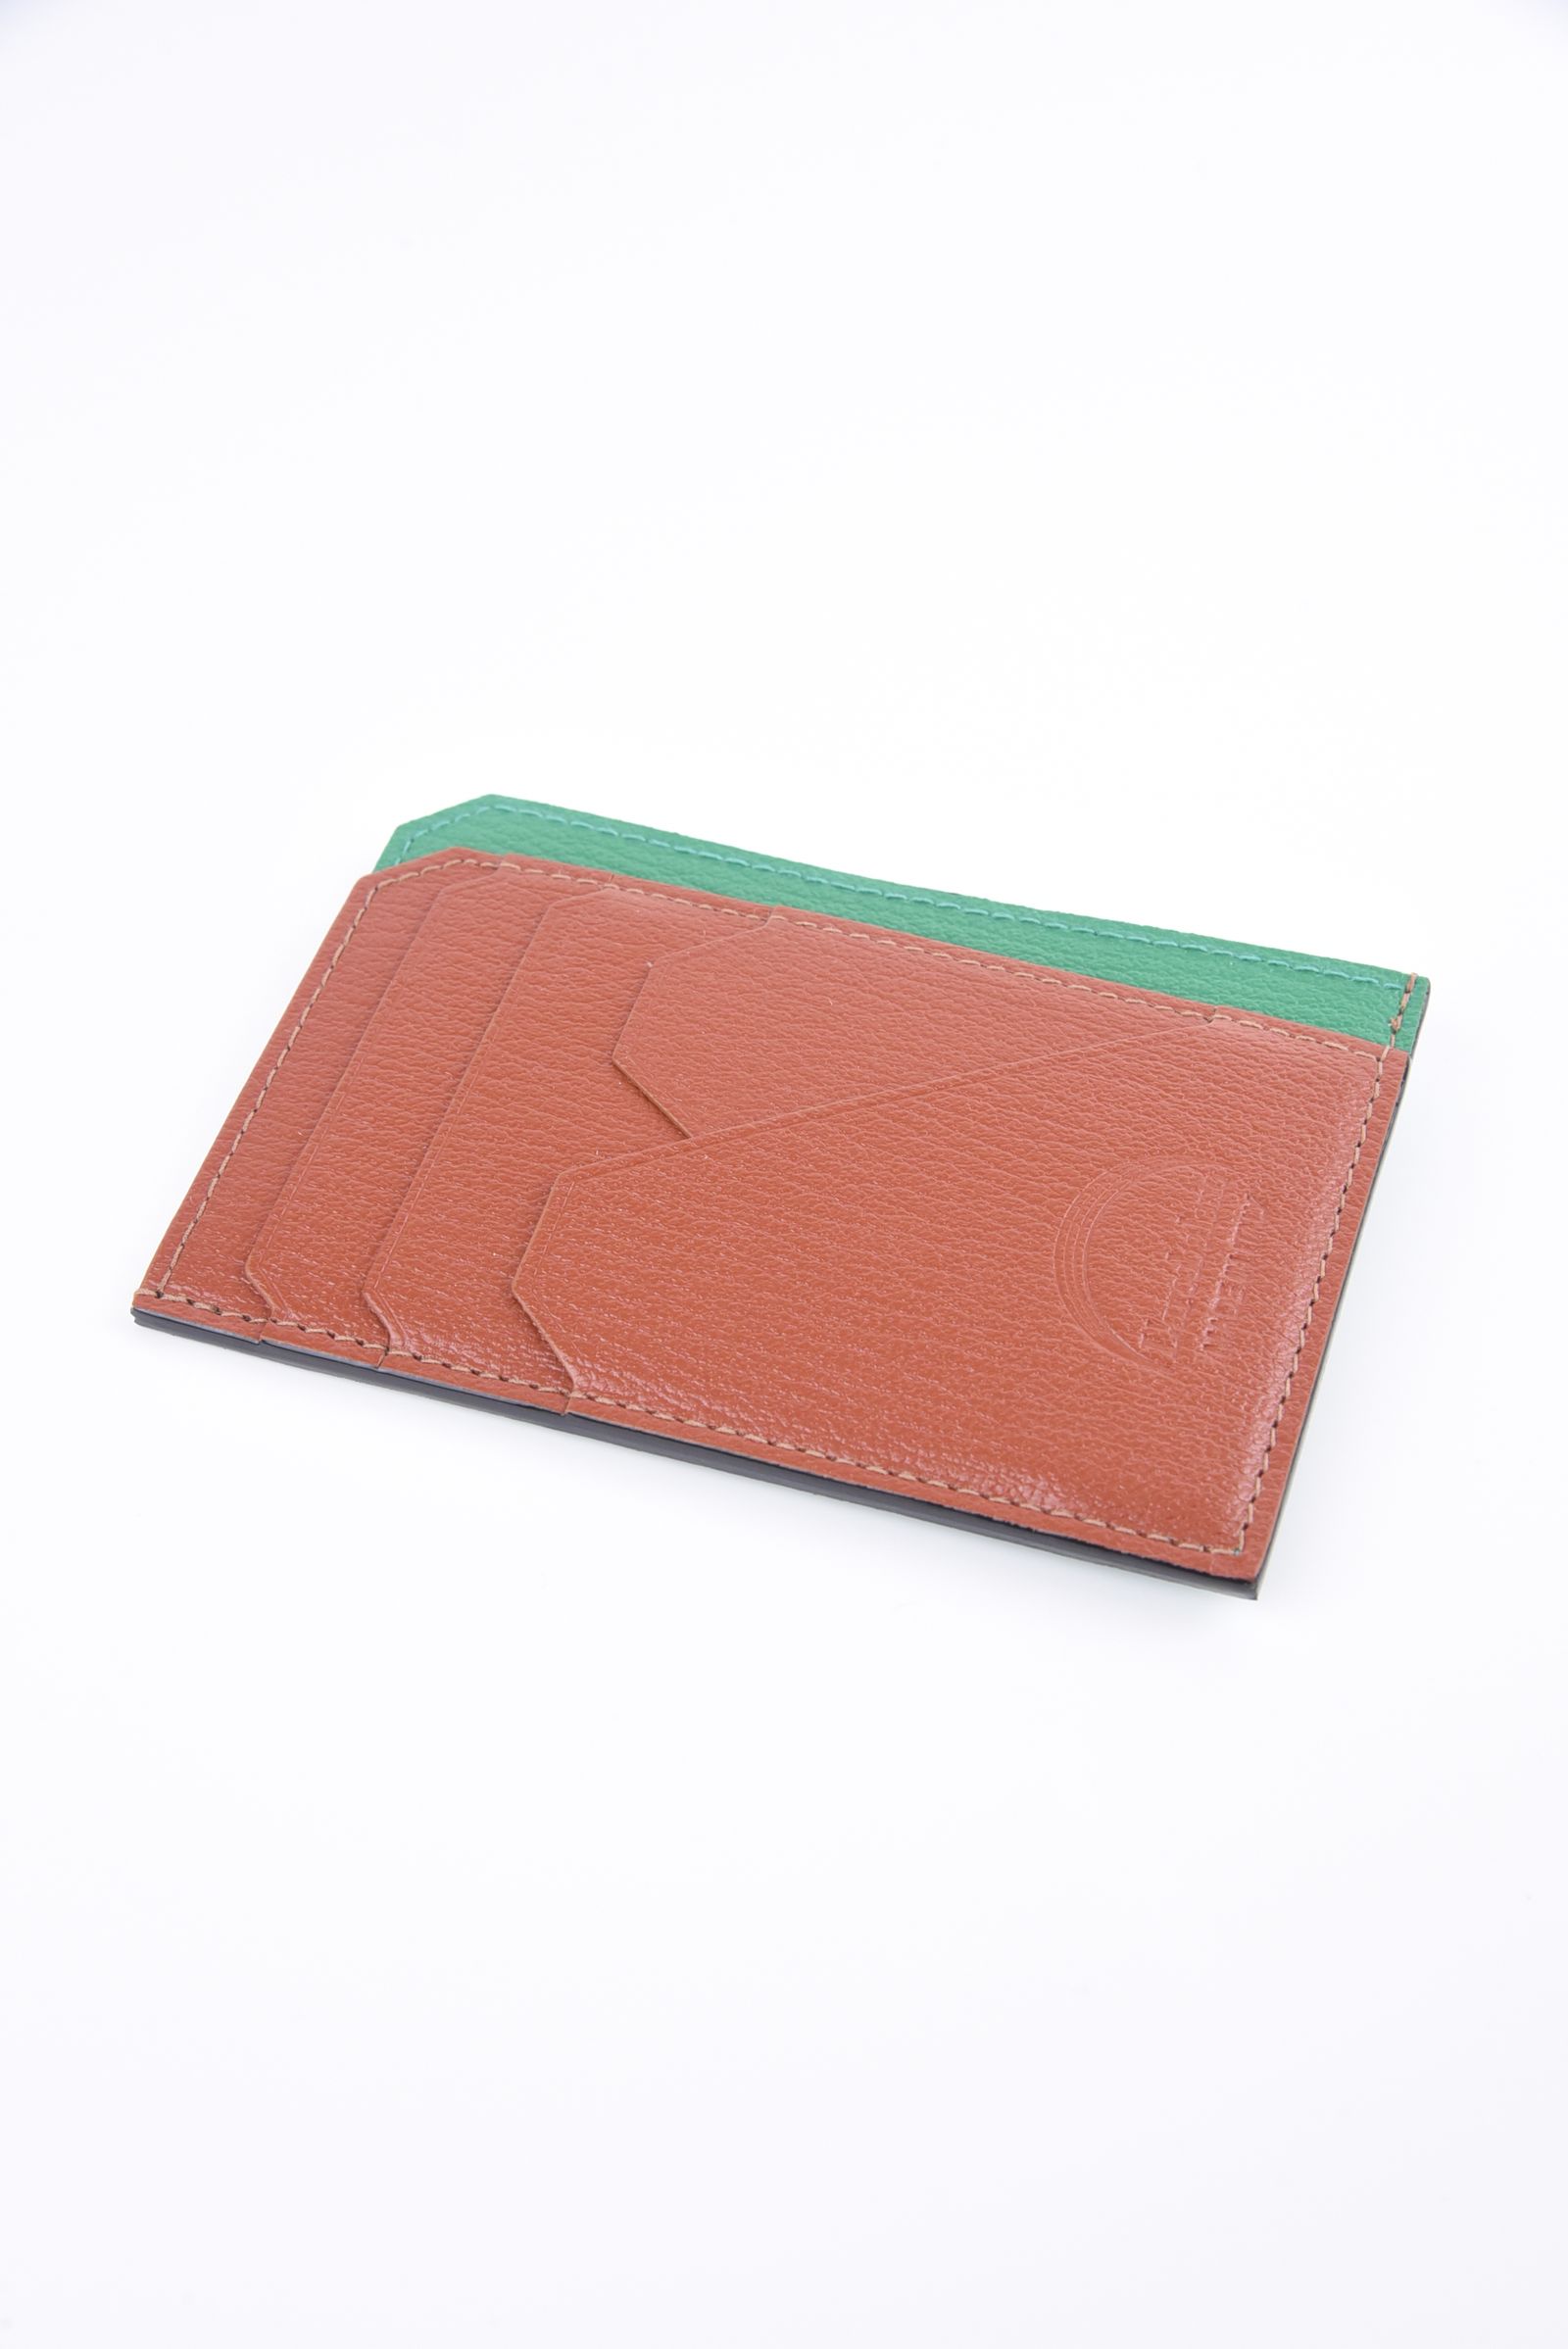 L'arcobaleno - 【HOLIDAY COLLECTION】 MINI WALLET / LA354 ゴート